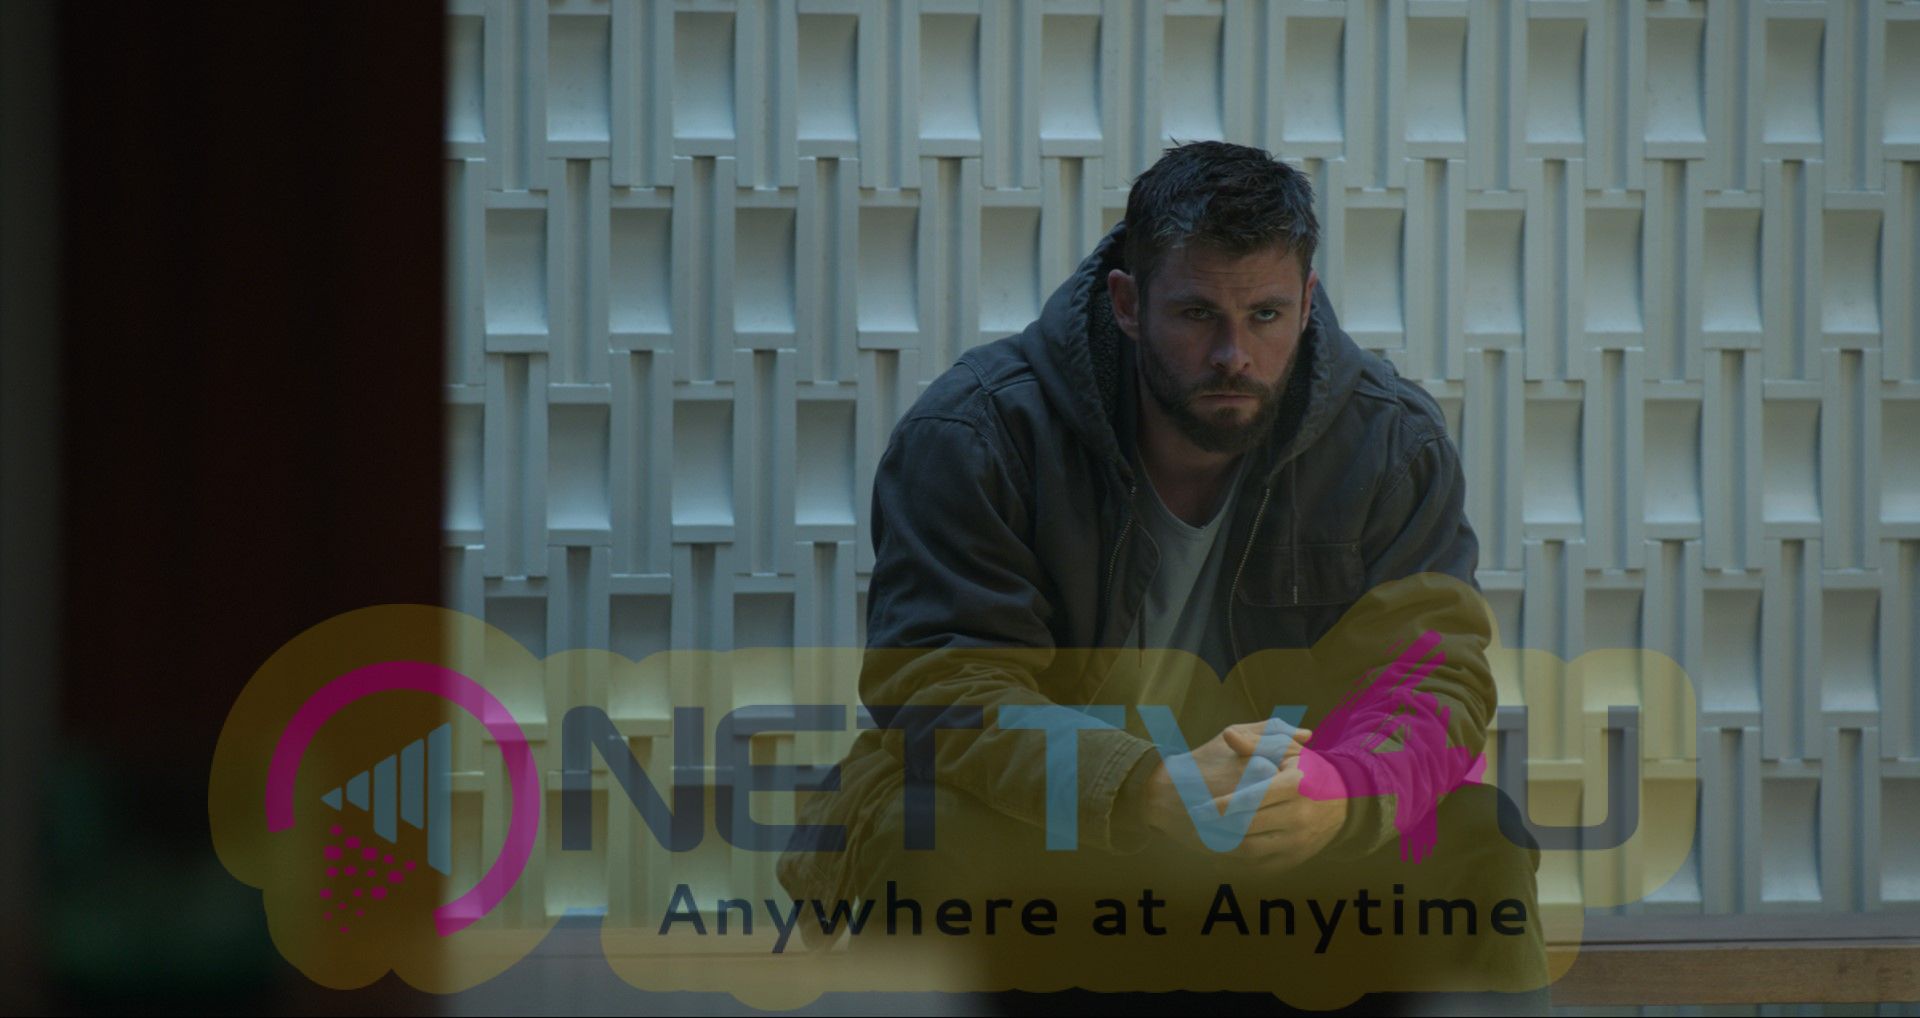 Avengers End Game Movie Stills And Images English Gallery